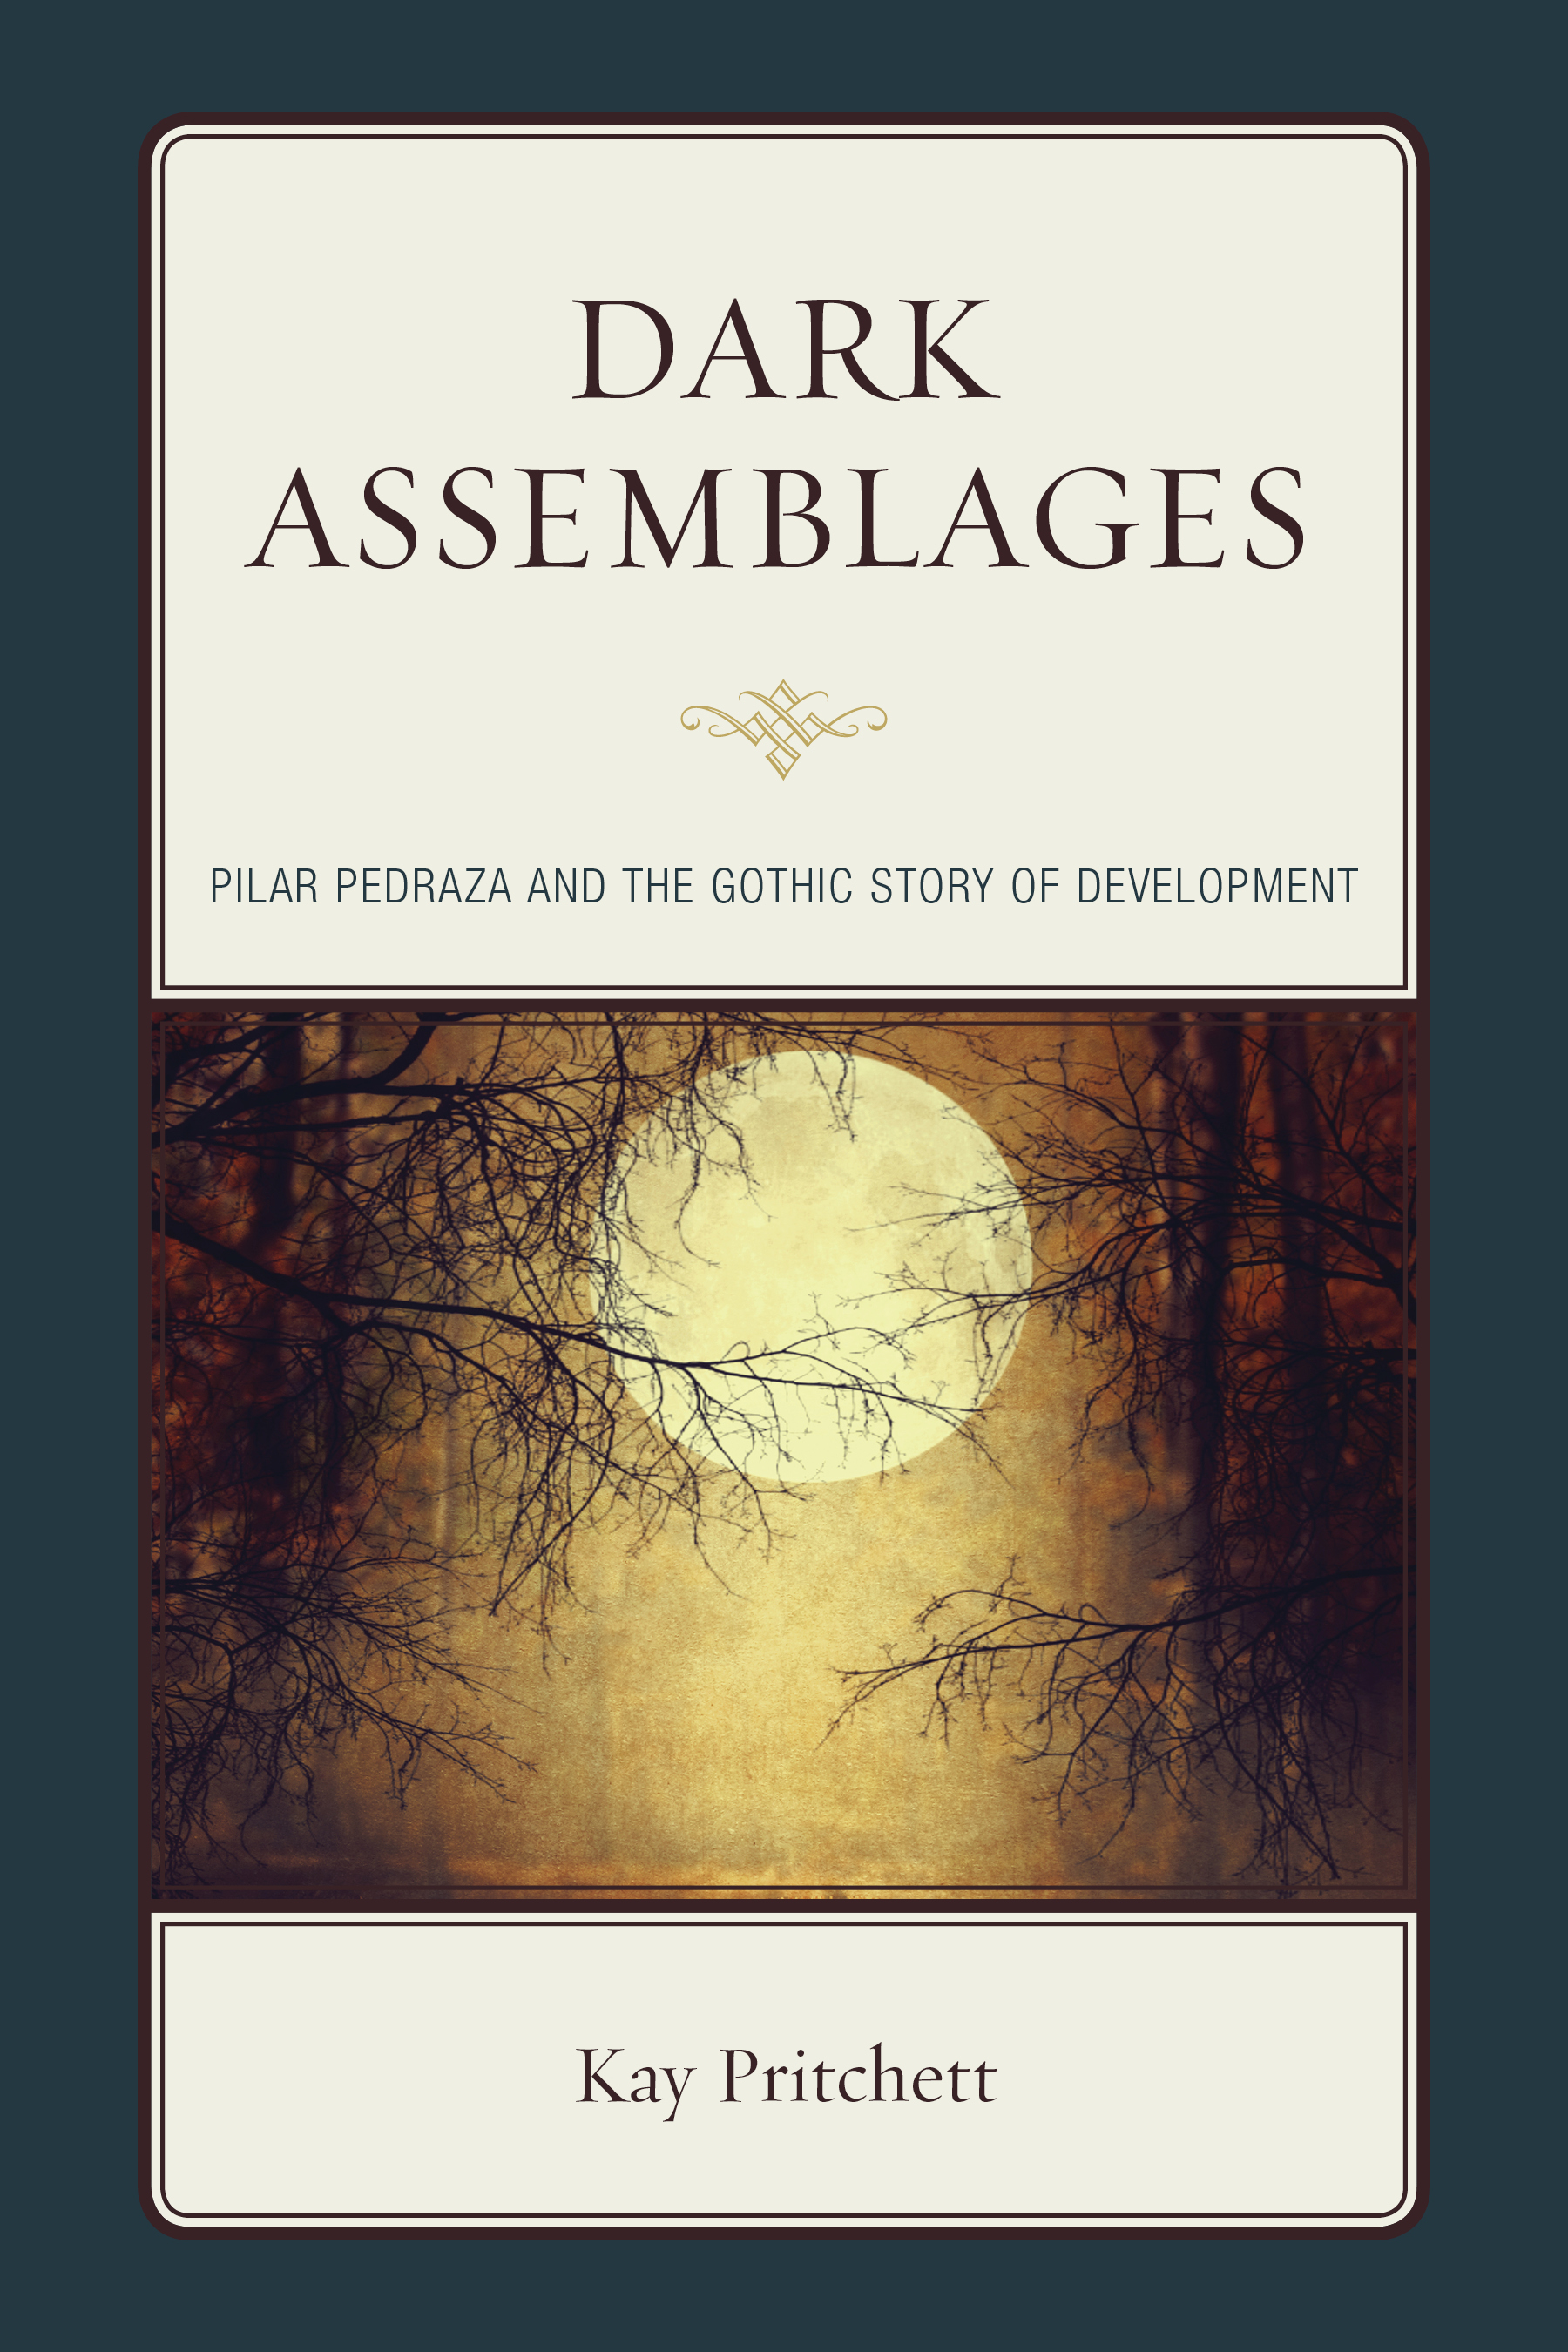 Dark Assemblages: Pilar Pedraza and the Gothic Story of Development